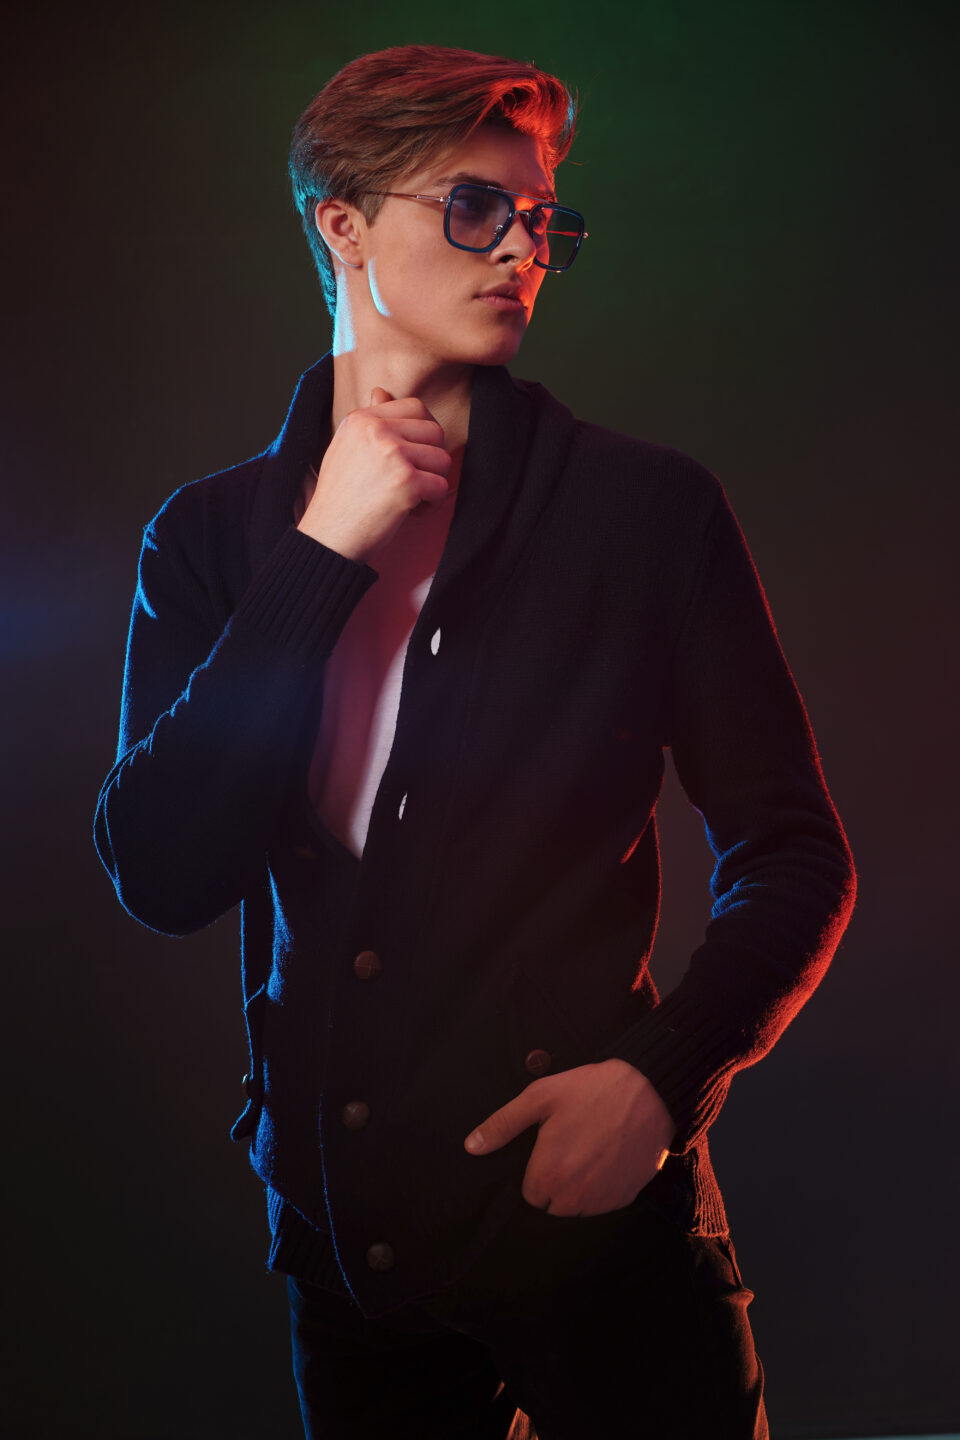 Trendy young man with cool hairstyle wearing black jacket with sunglasses. High Fashion male model posing on black background. Art design concept